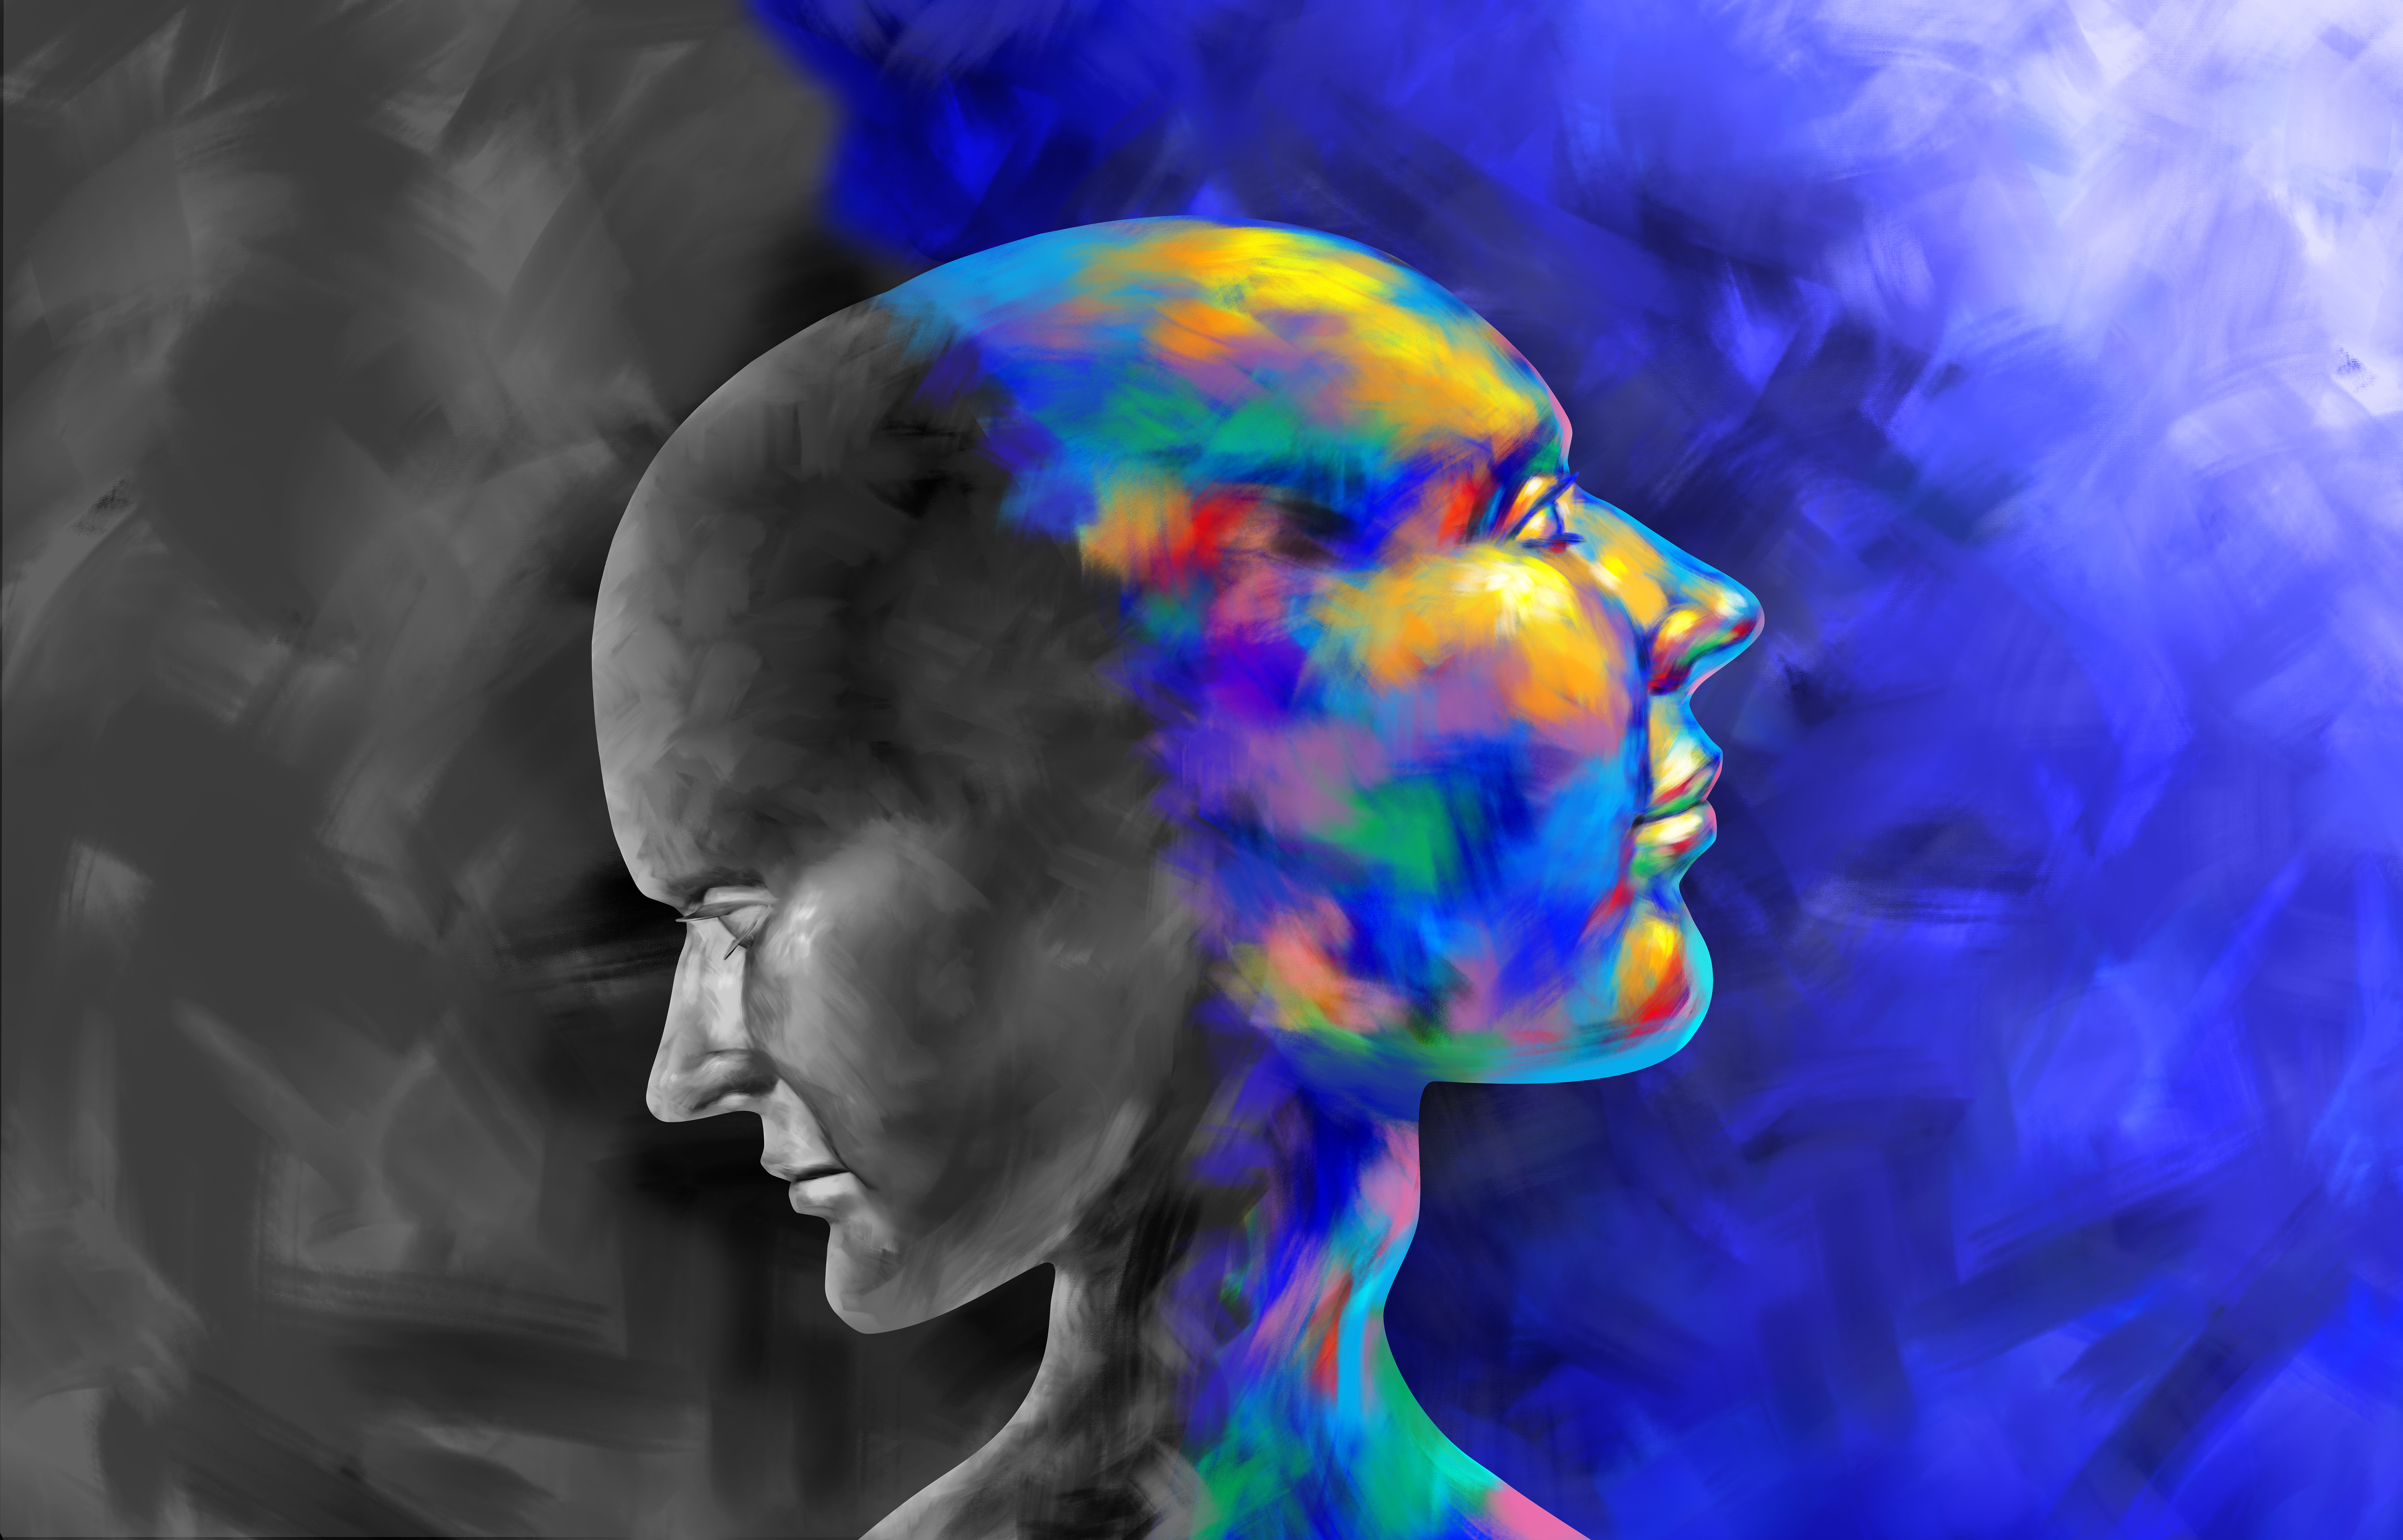 A head with two faces looking in different directions, one looking upward in a pleasing psychedelic array of colors, another looking down, in a darker, gloomier direction.